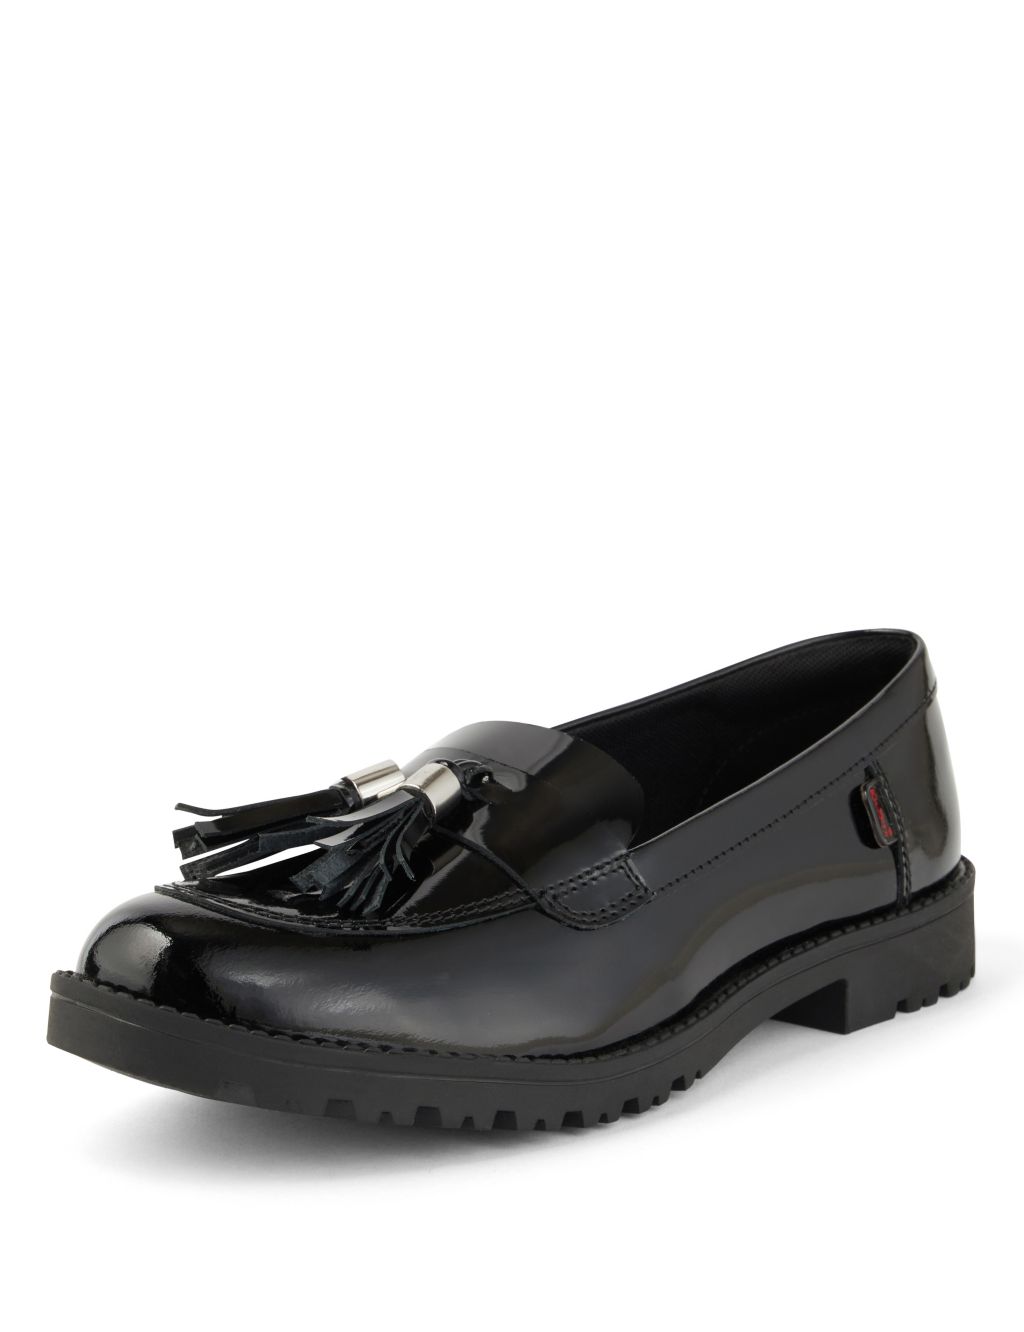 Leather Patent Tassel Loafers image 6